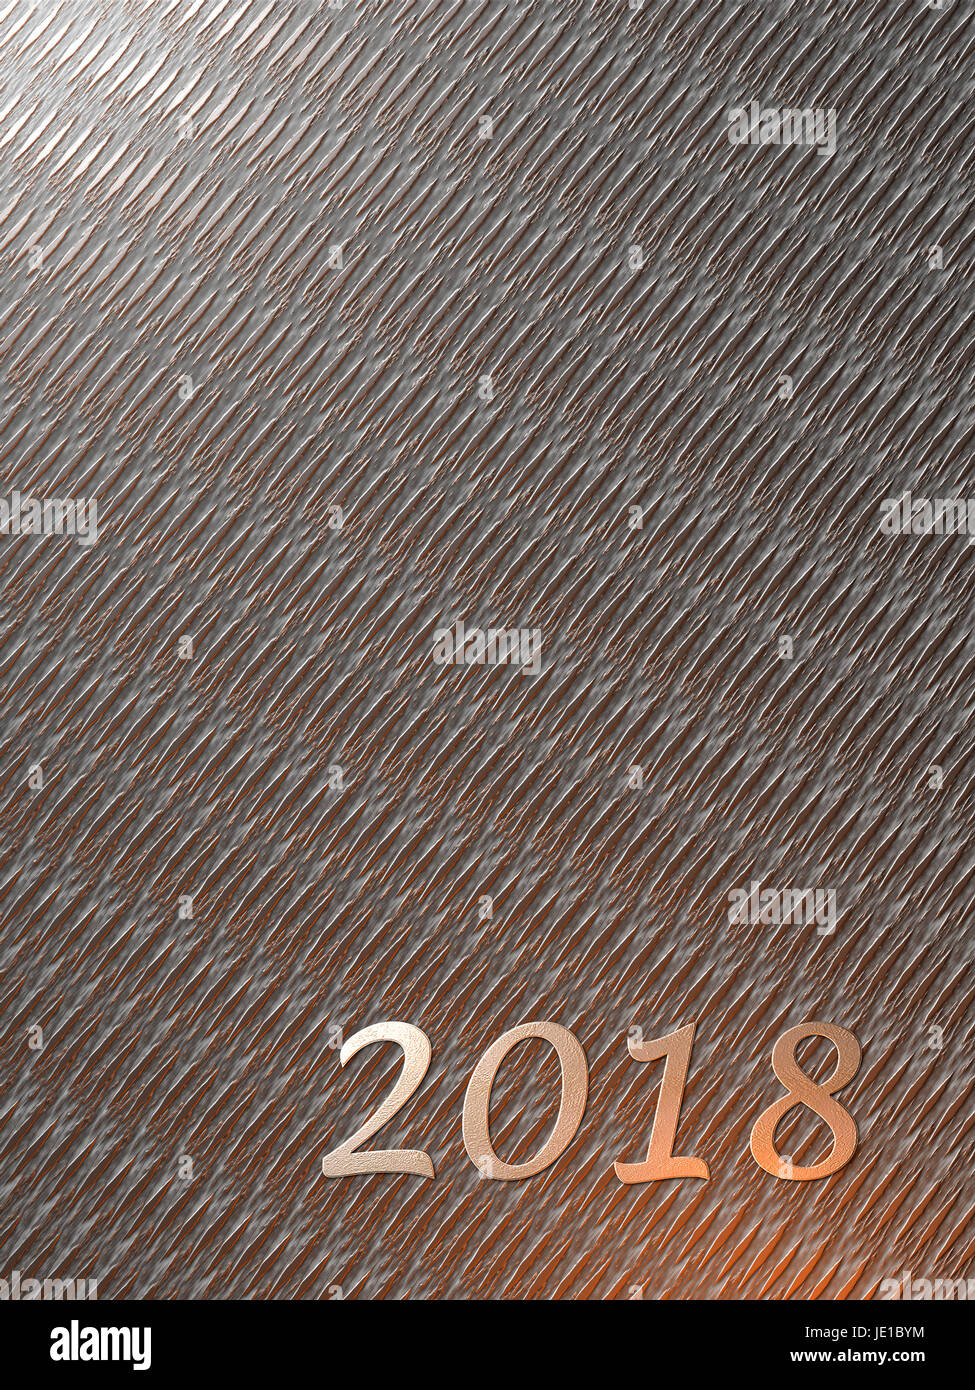 Silver 2018 on Metal Grating Stock Photo